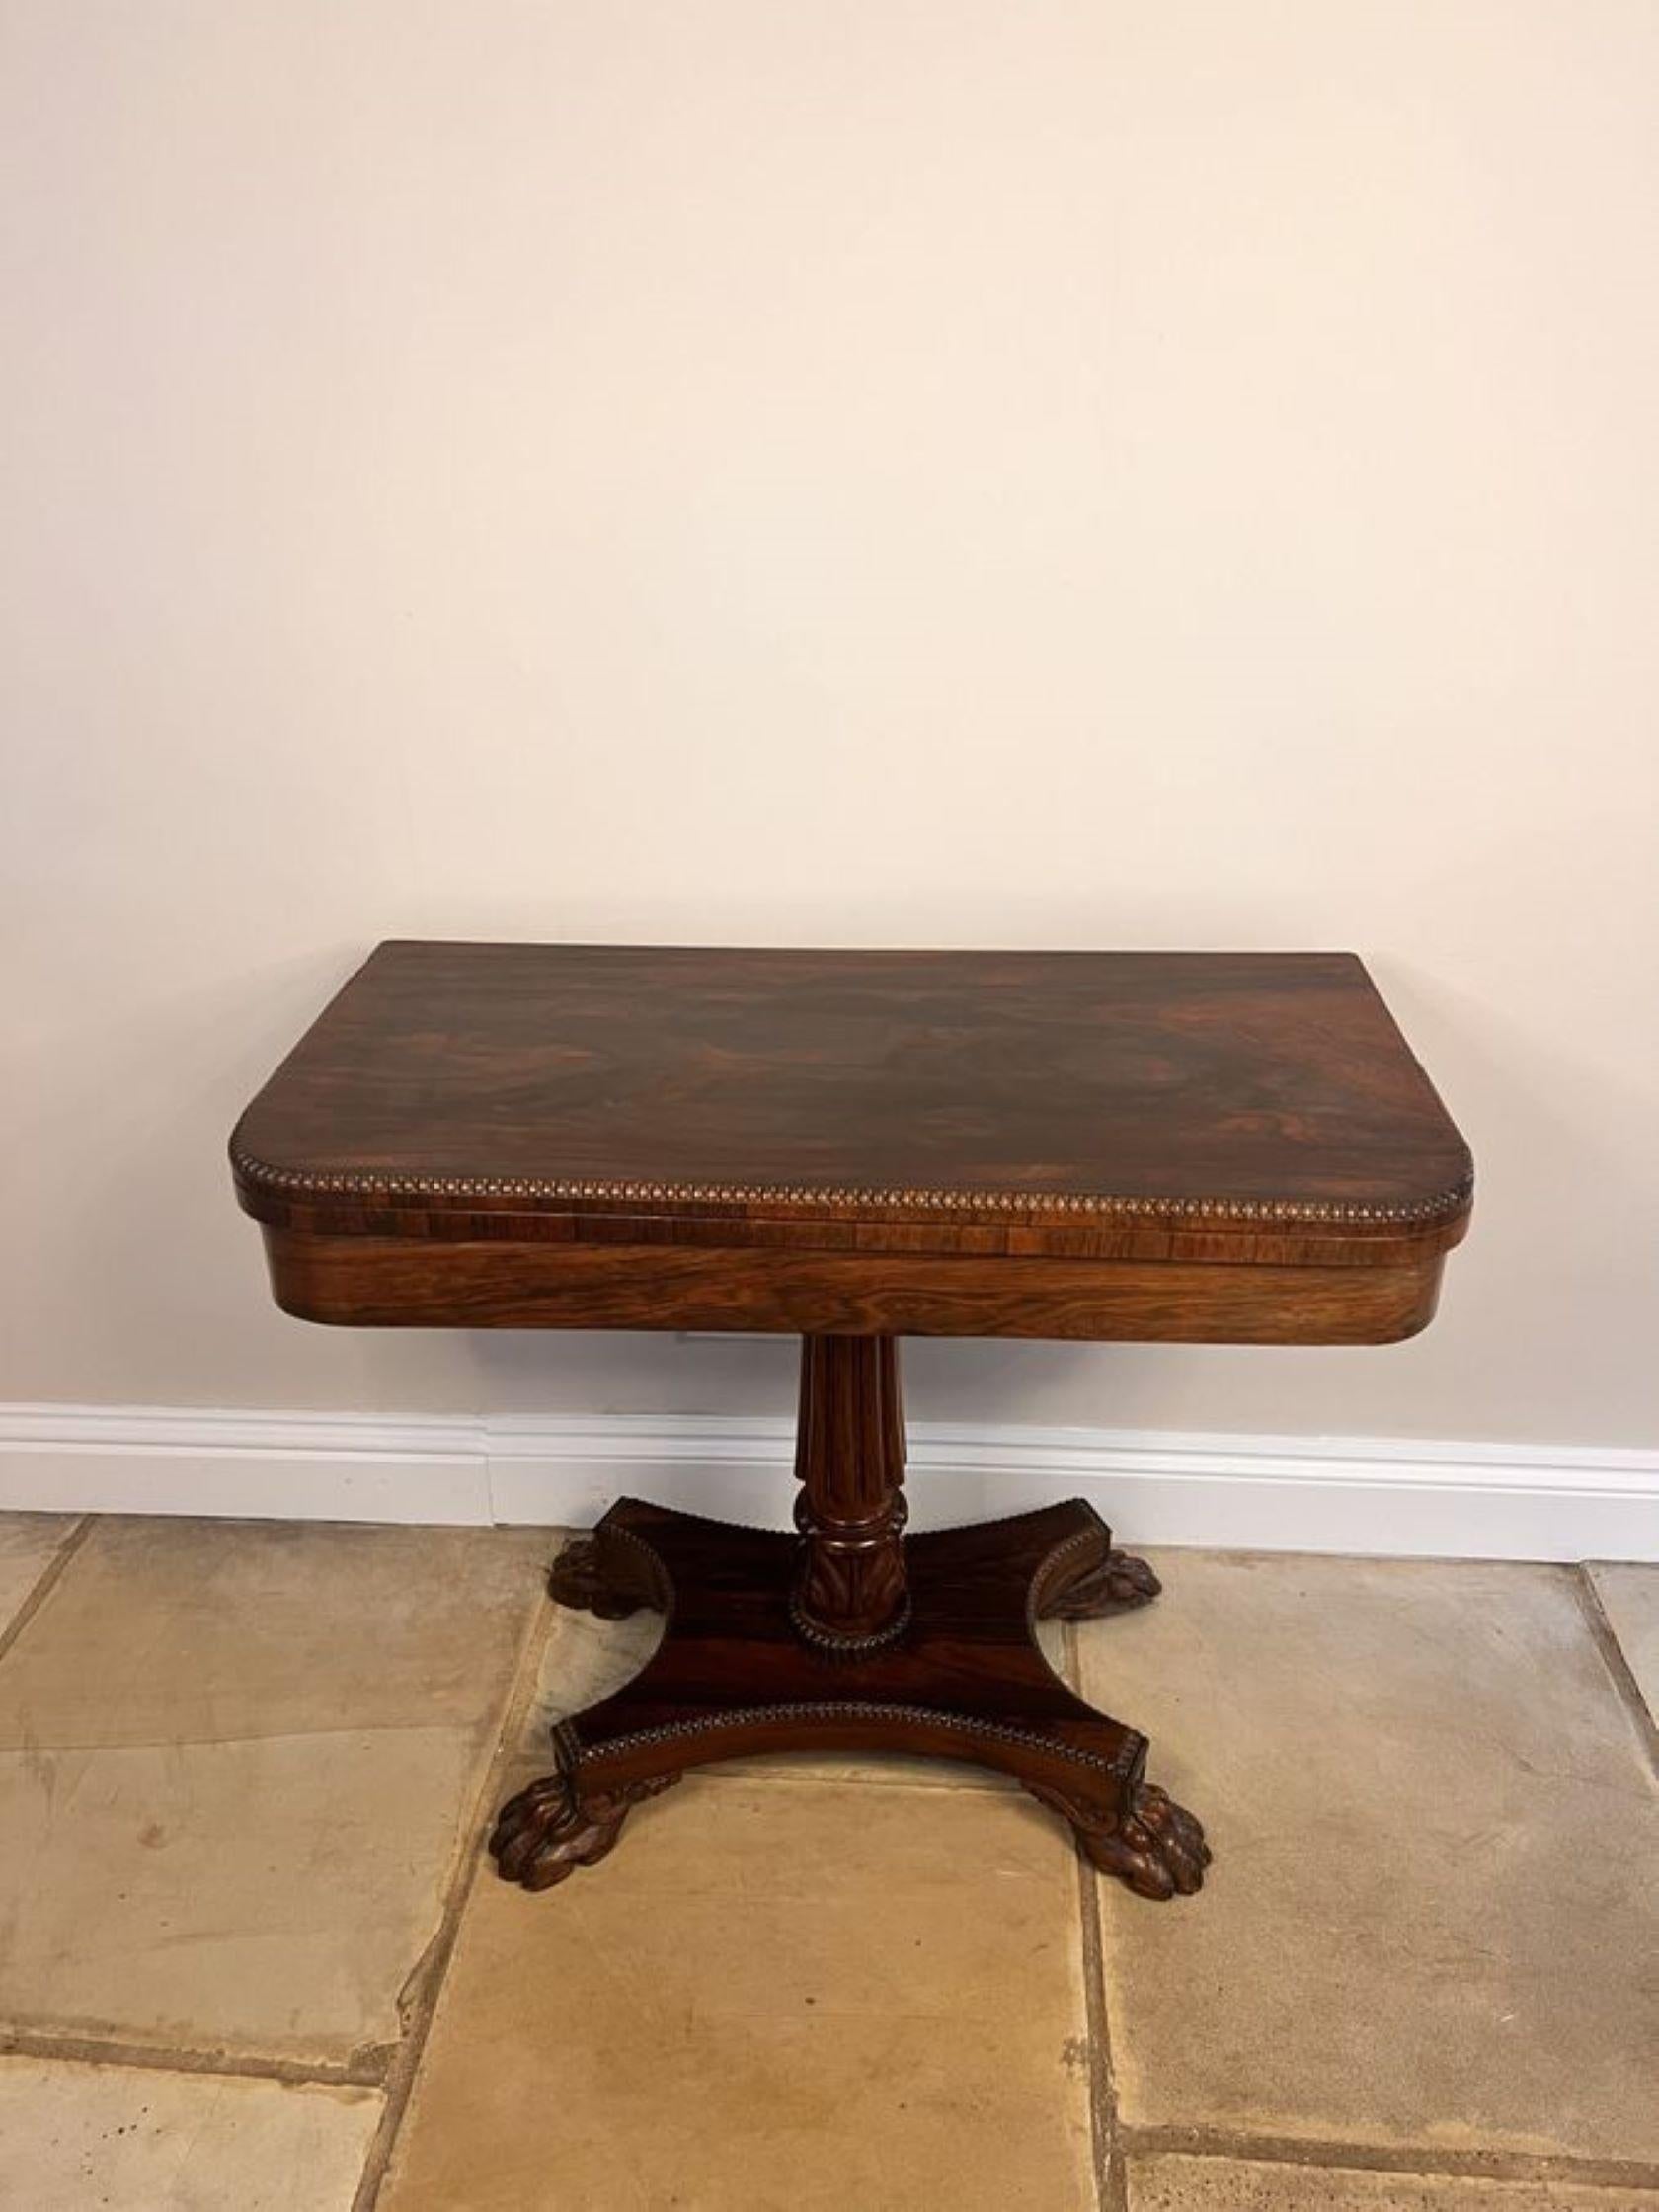 Wonderful antique Regency quality rosewood card table, having a quality rosewood fold over top with a carved edge opening to reveal a baize interior, supported by a reeded carved solid rosewood pedestal column, standing on a platform with a carved